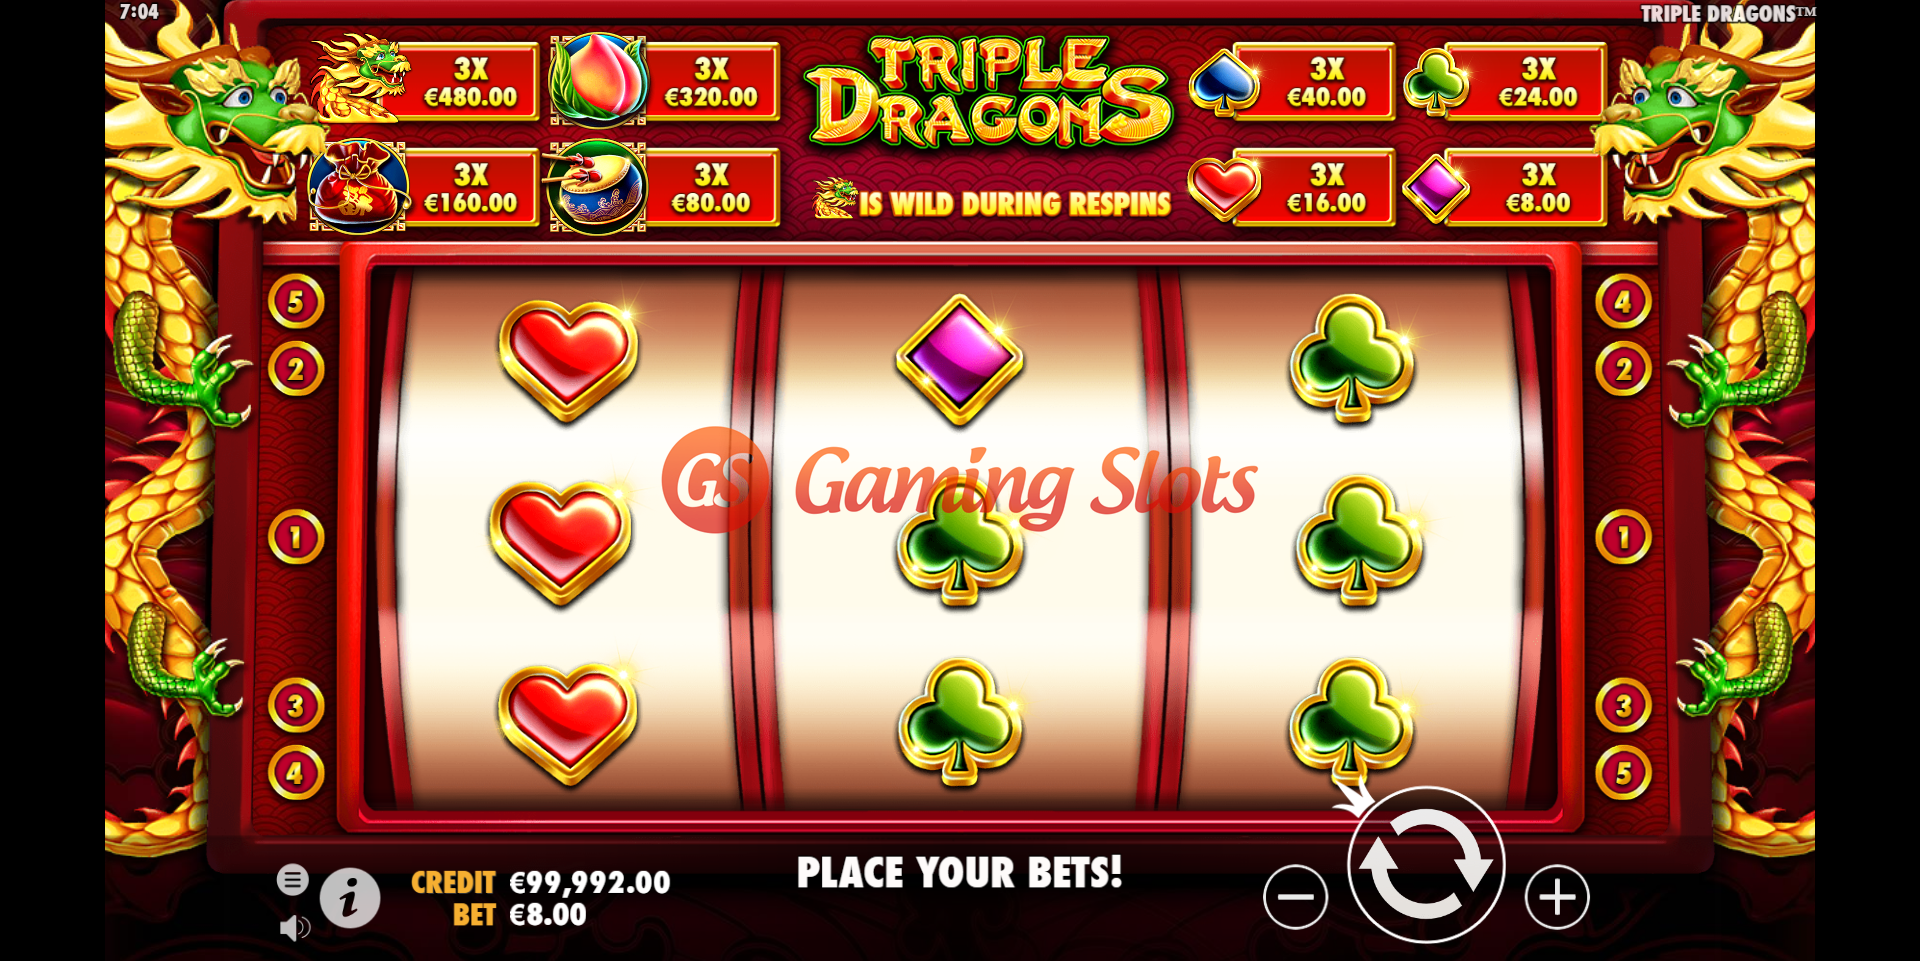 Base Game for Triple Dragons slot from Pragmatic Play